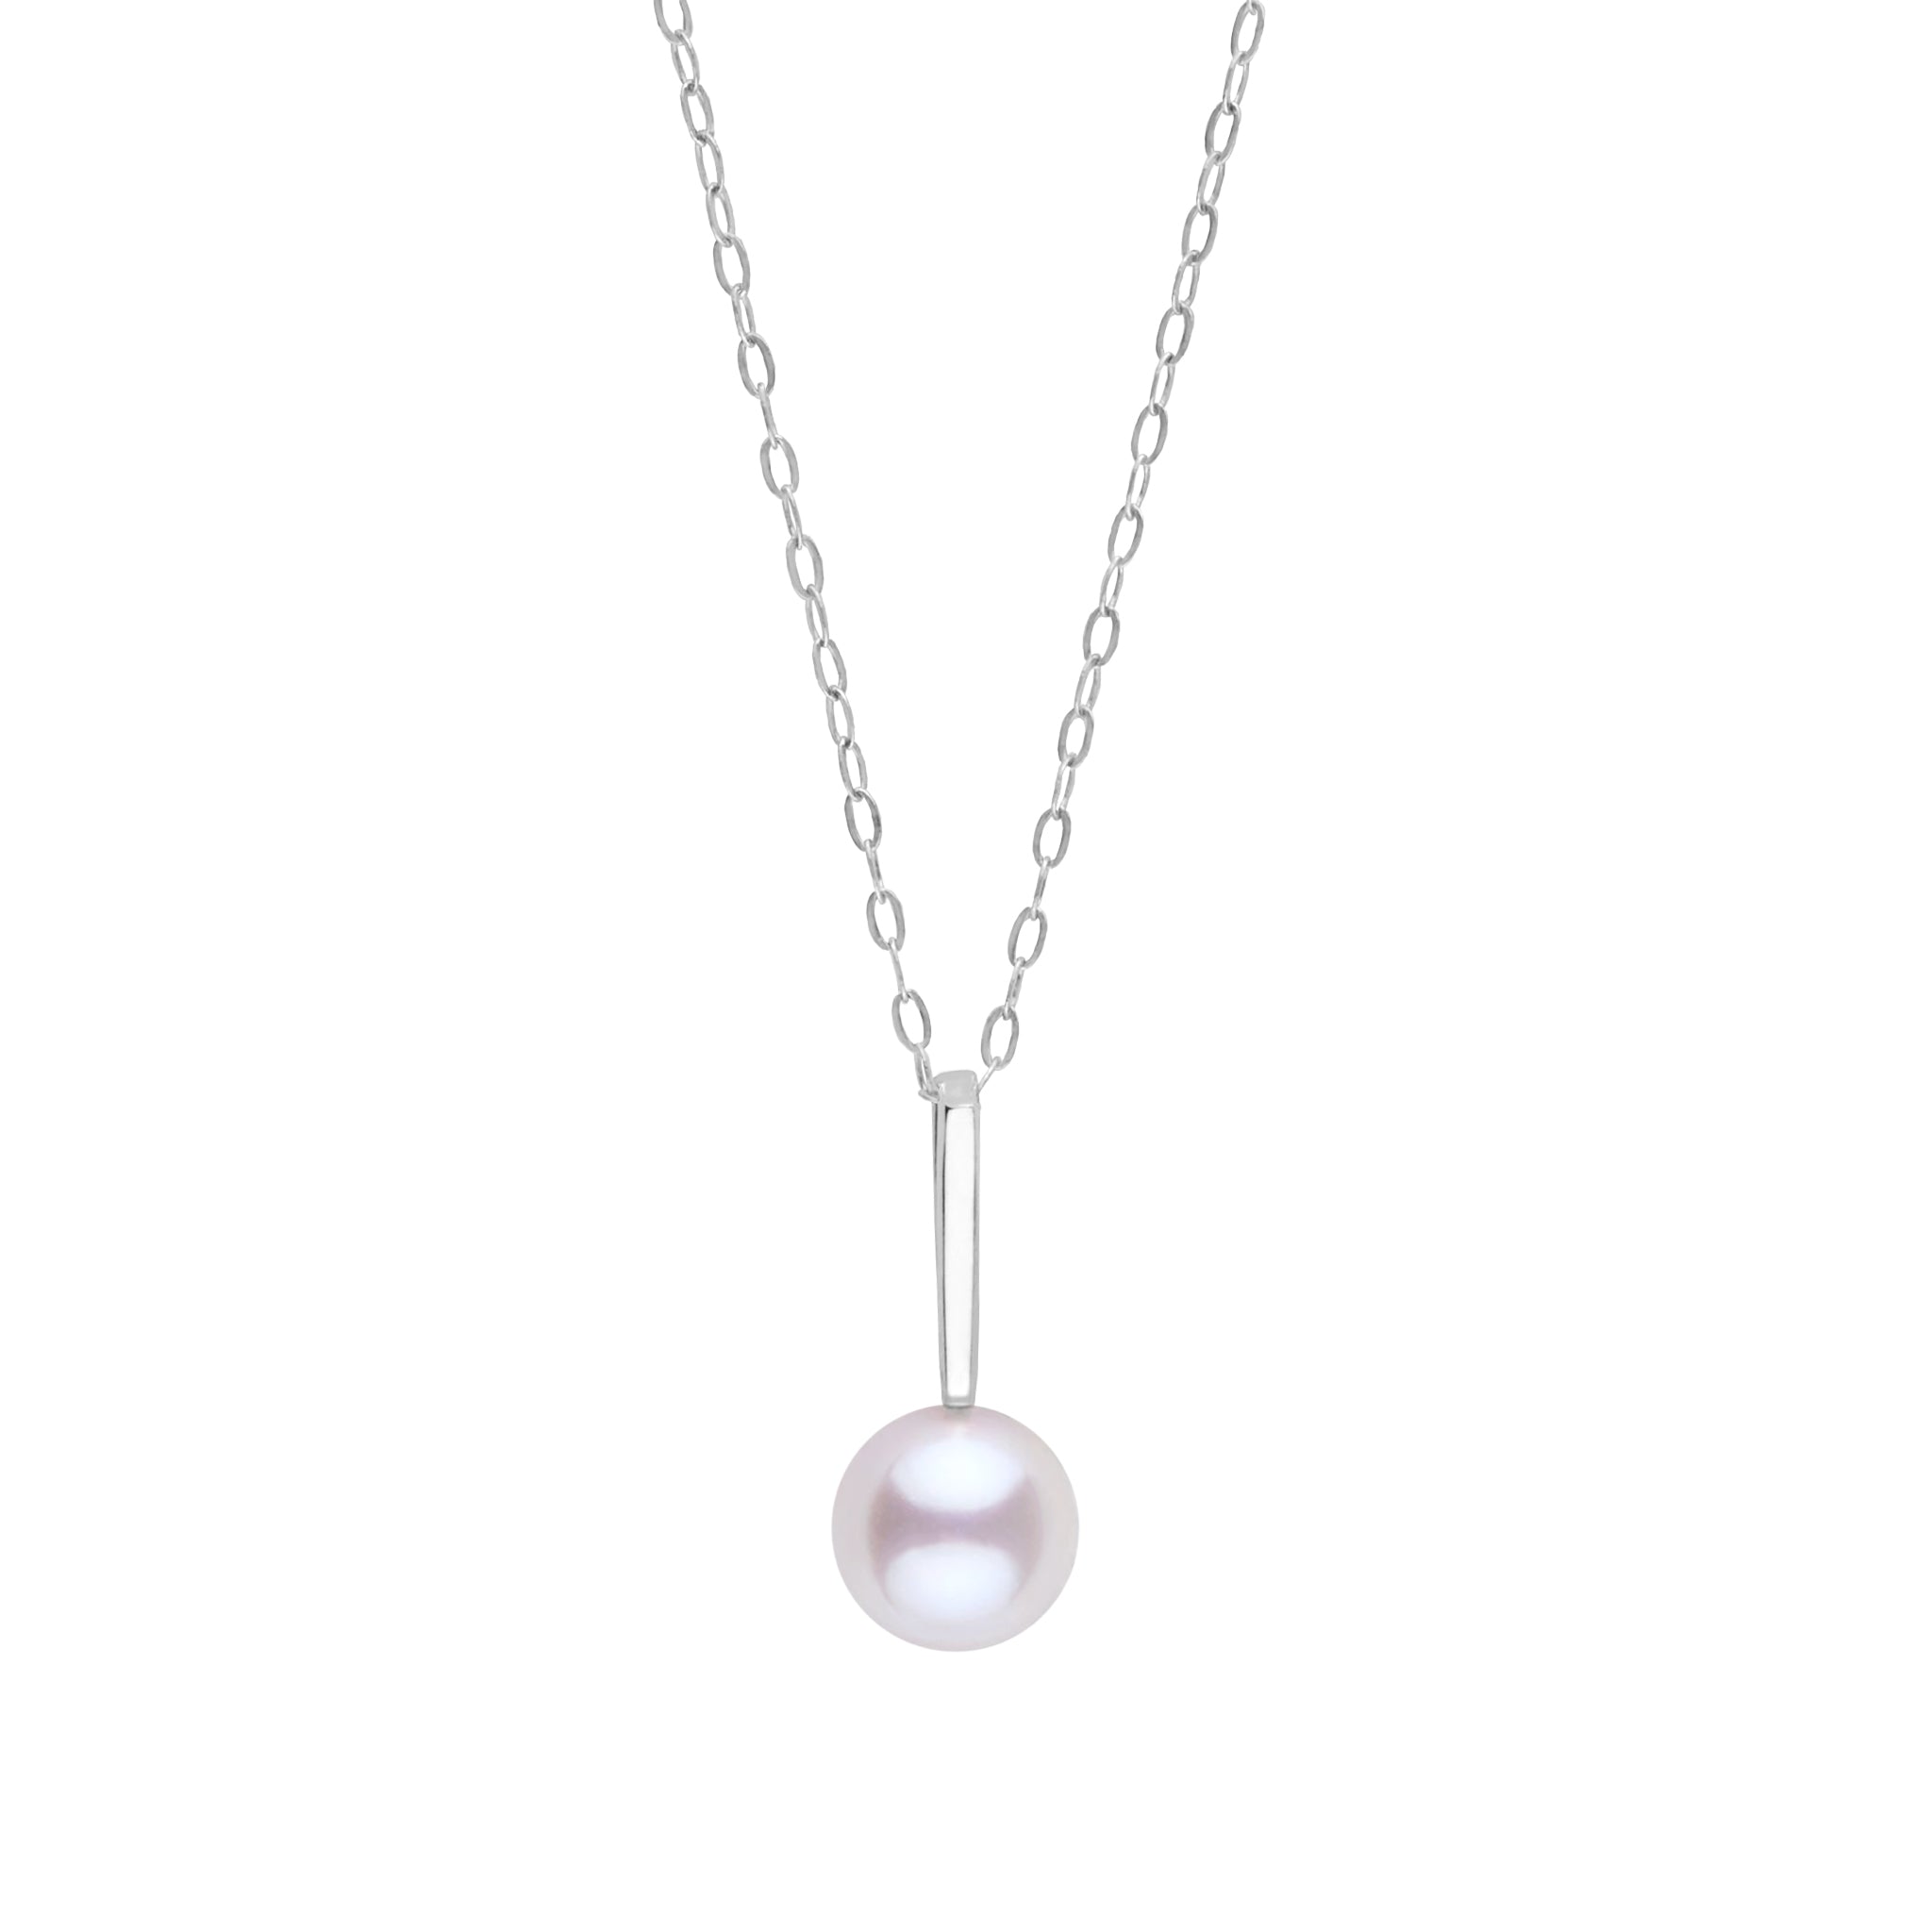 Petite Bar Collection 6.5-7.0 mm Akoya Pearl Pendant White Gold Front View